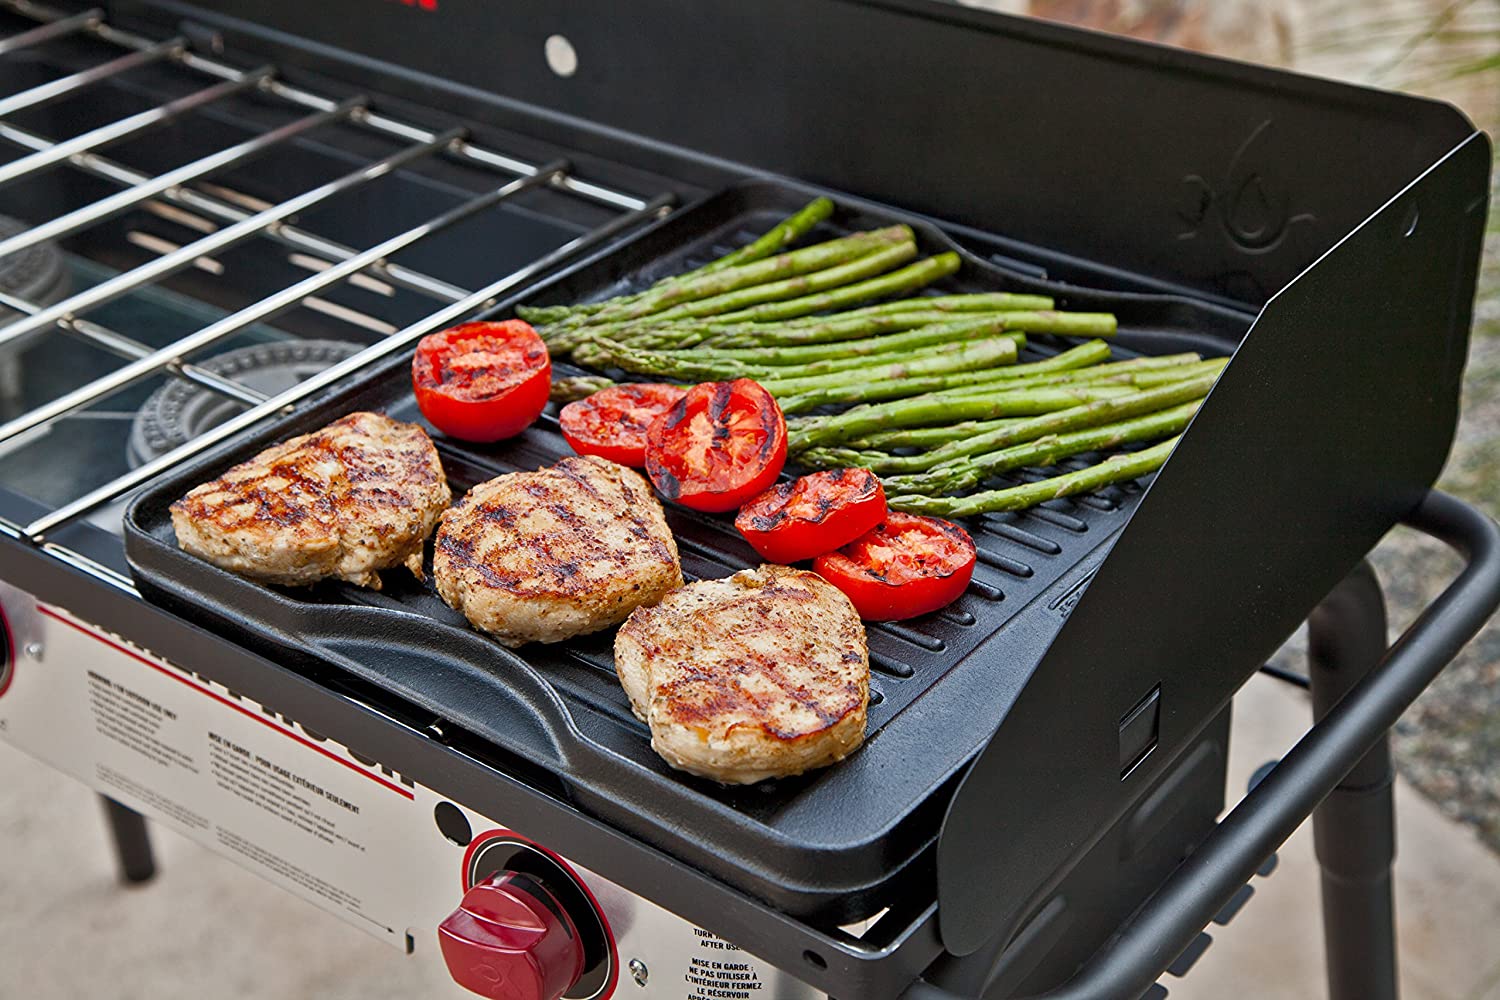 Camp Chef 14 in x 16 in Cast Iron Reversible Grill/Griddle CGG16B